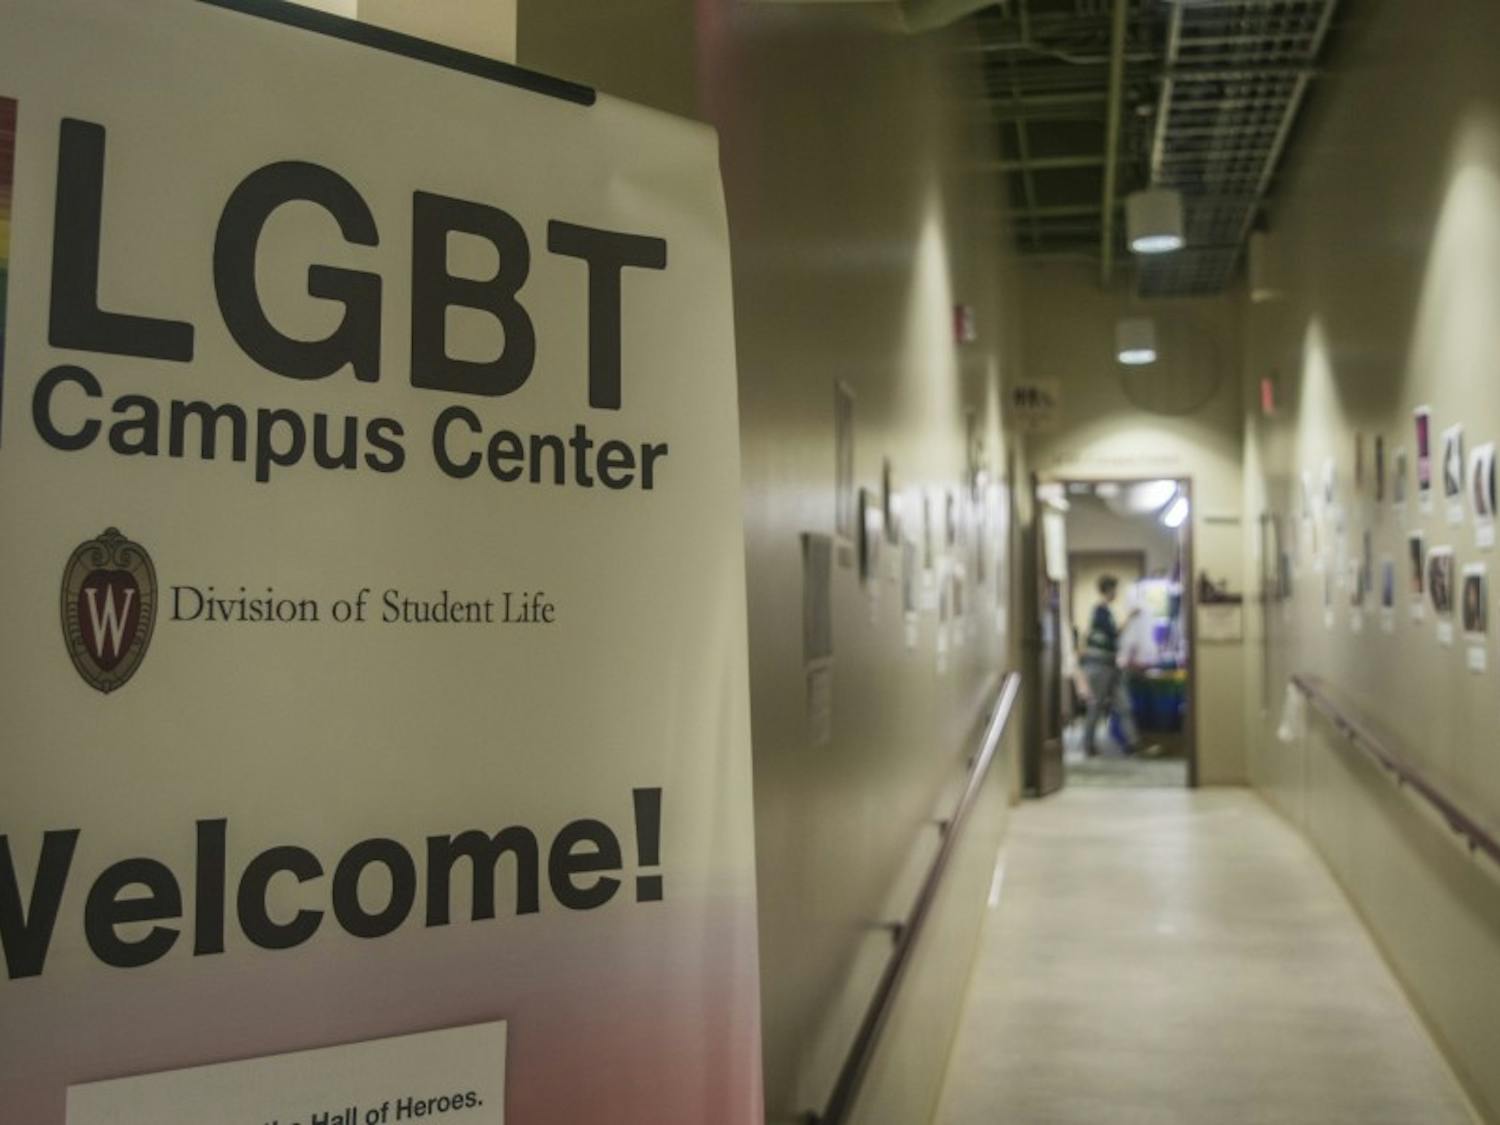 UW-Madison's LGBT Campus Center will change its name to the&nbsp;Gender and Sexuality Spectrum Center.